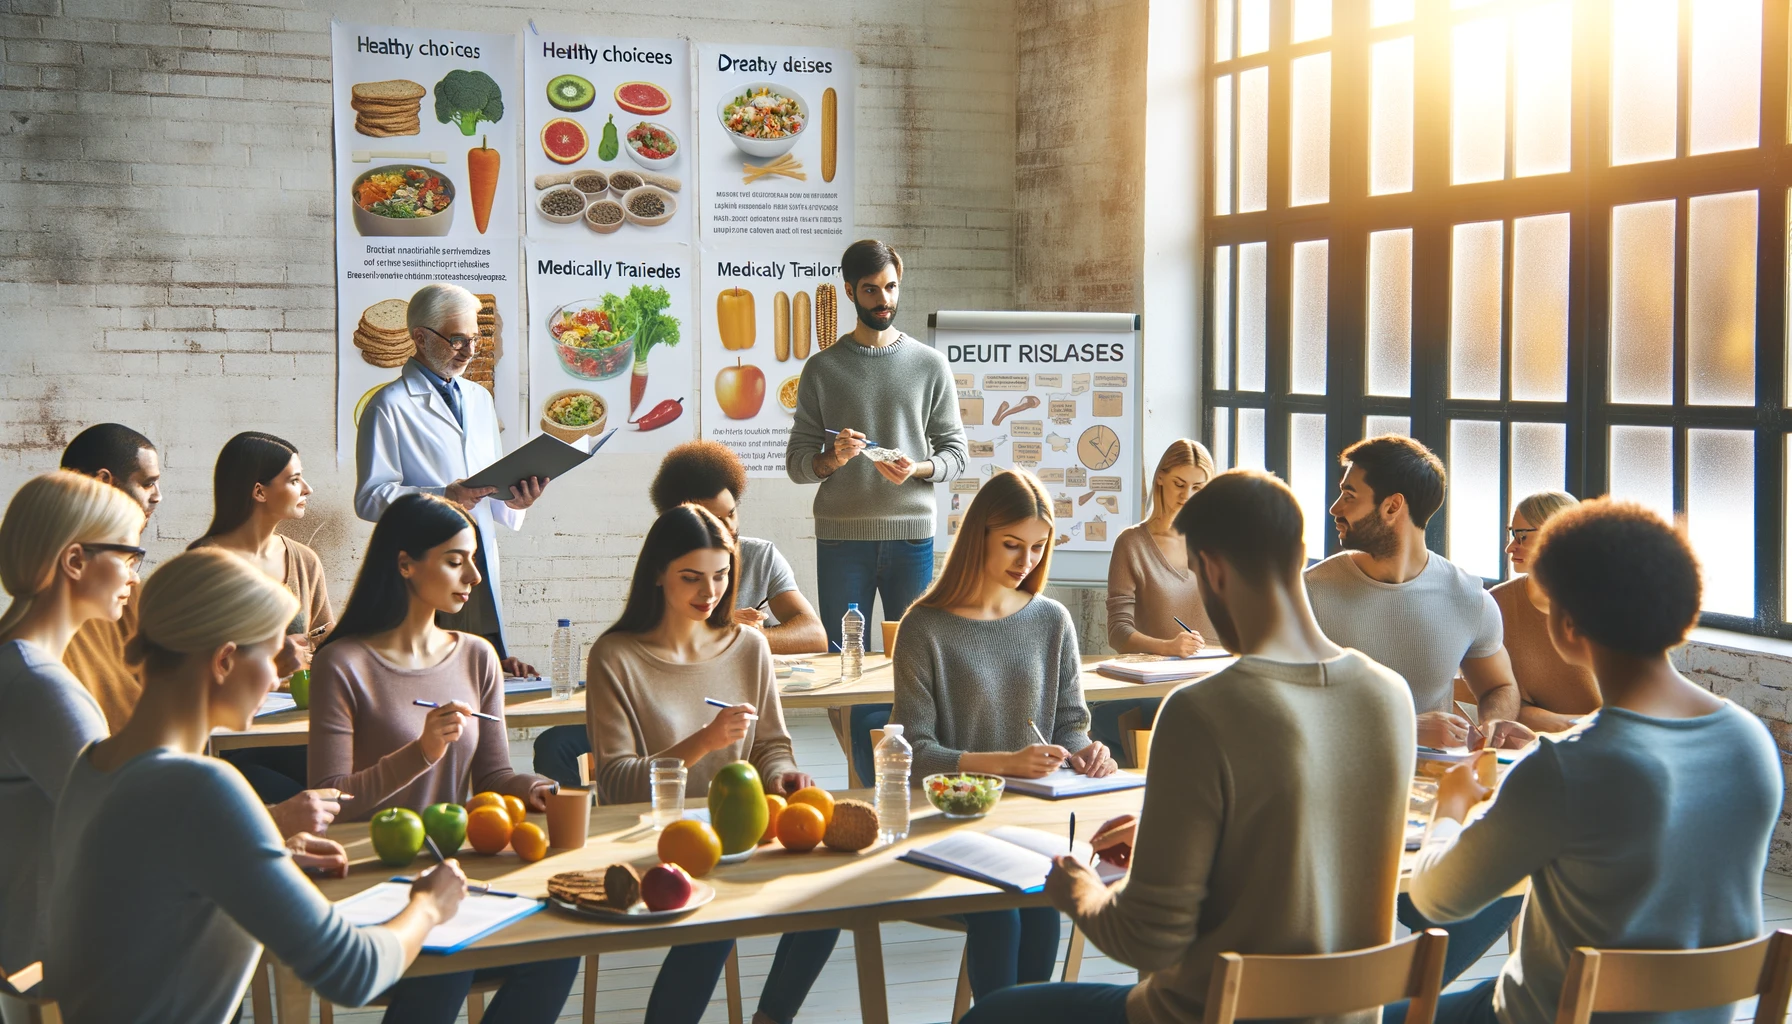 Diverse individuals in a nutrition class, discussing medically tailored meals with diet-related diseases posters on the walls.